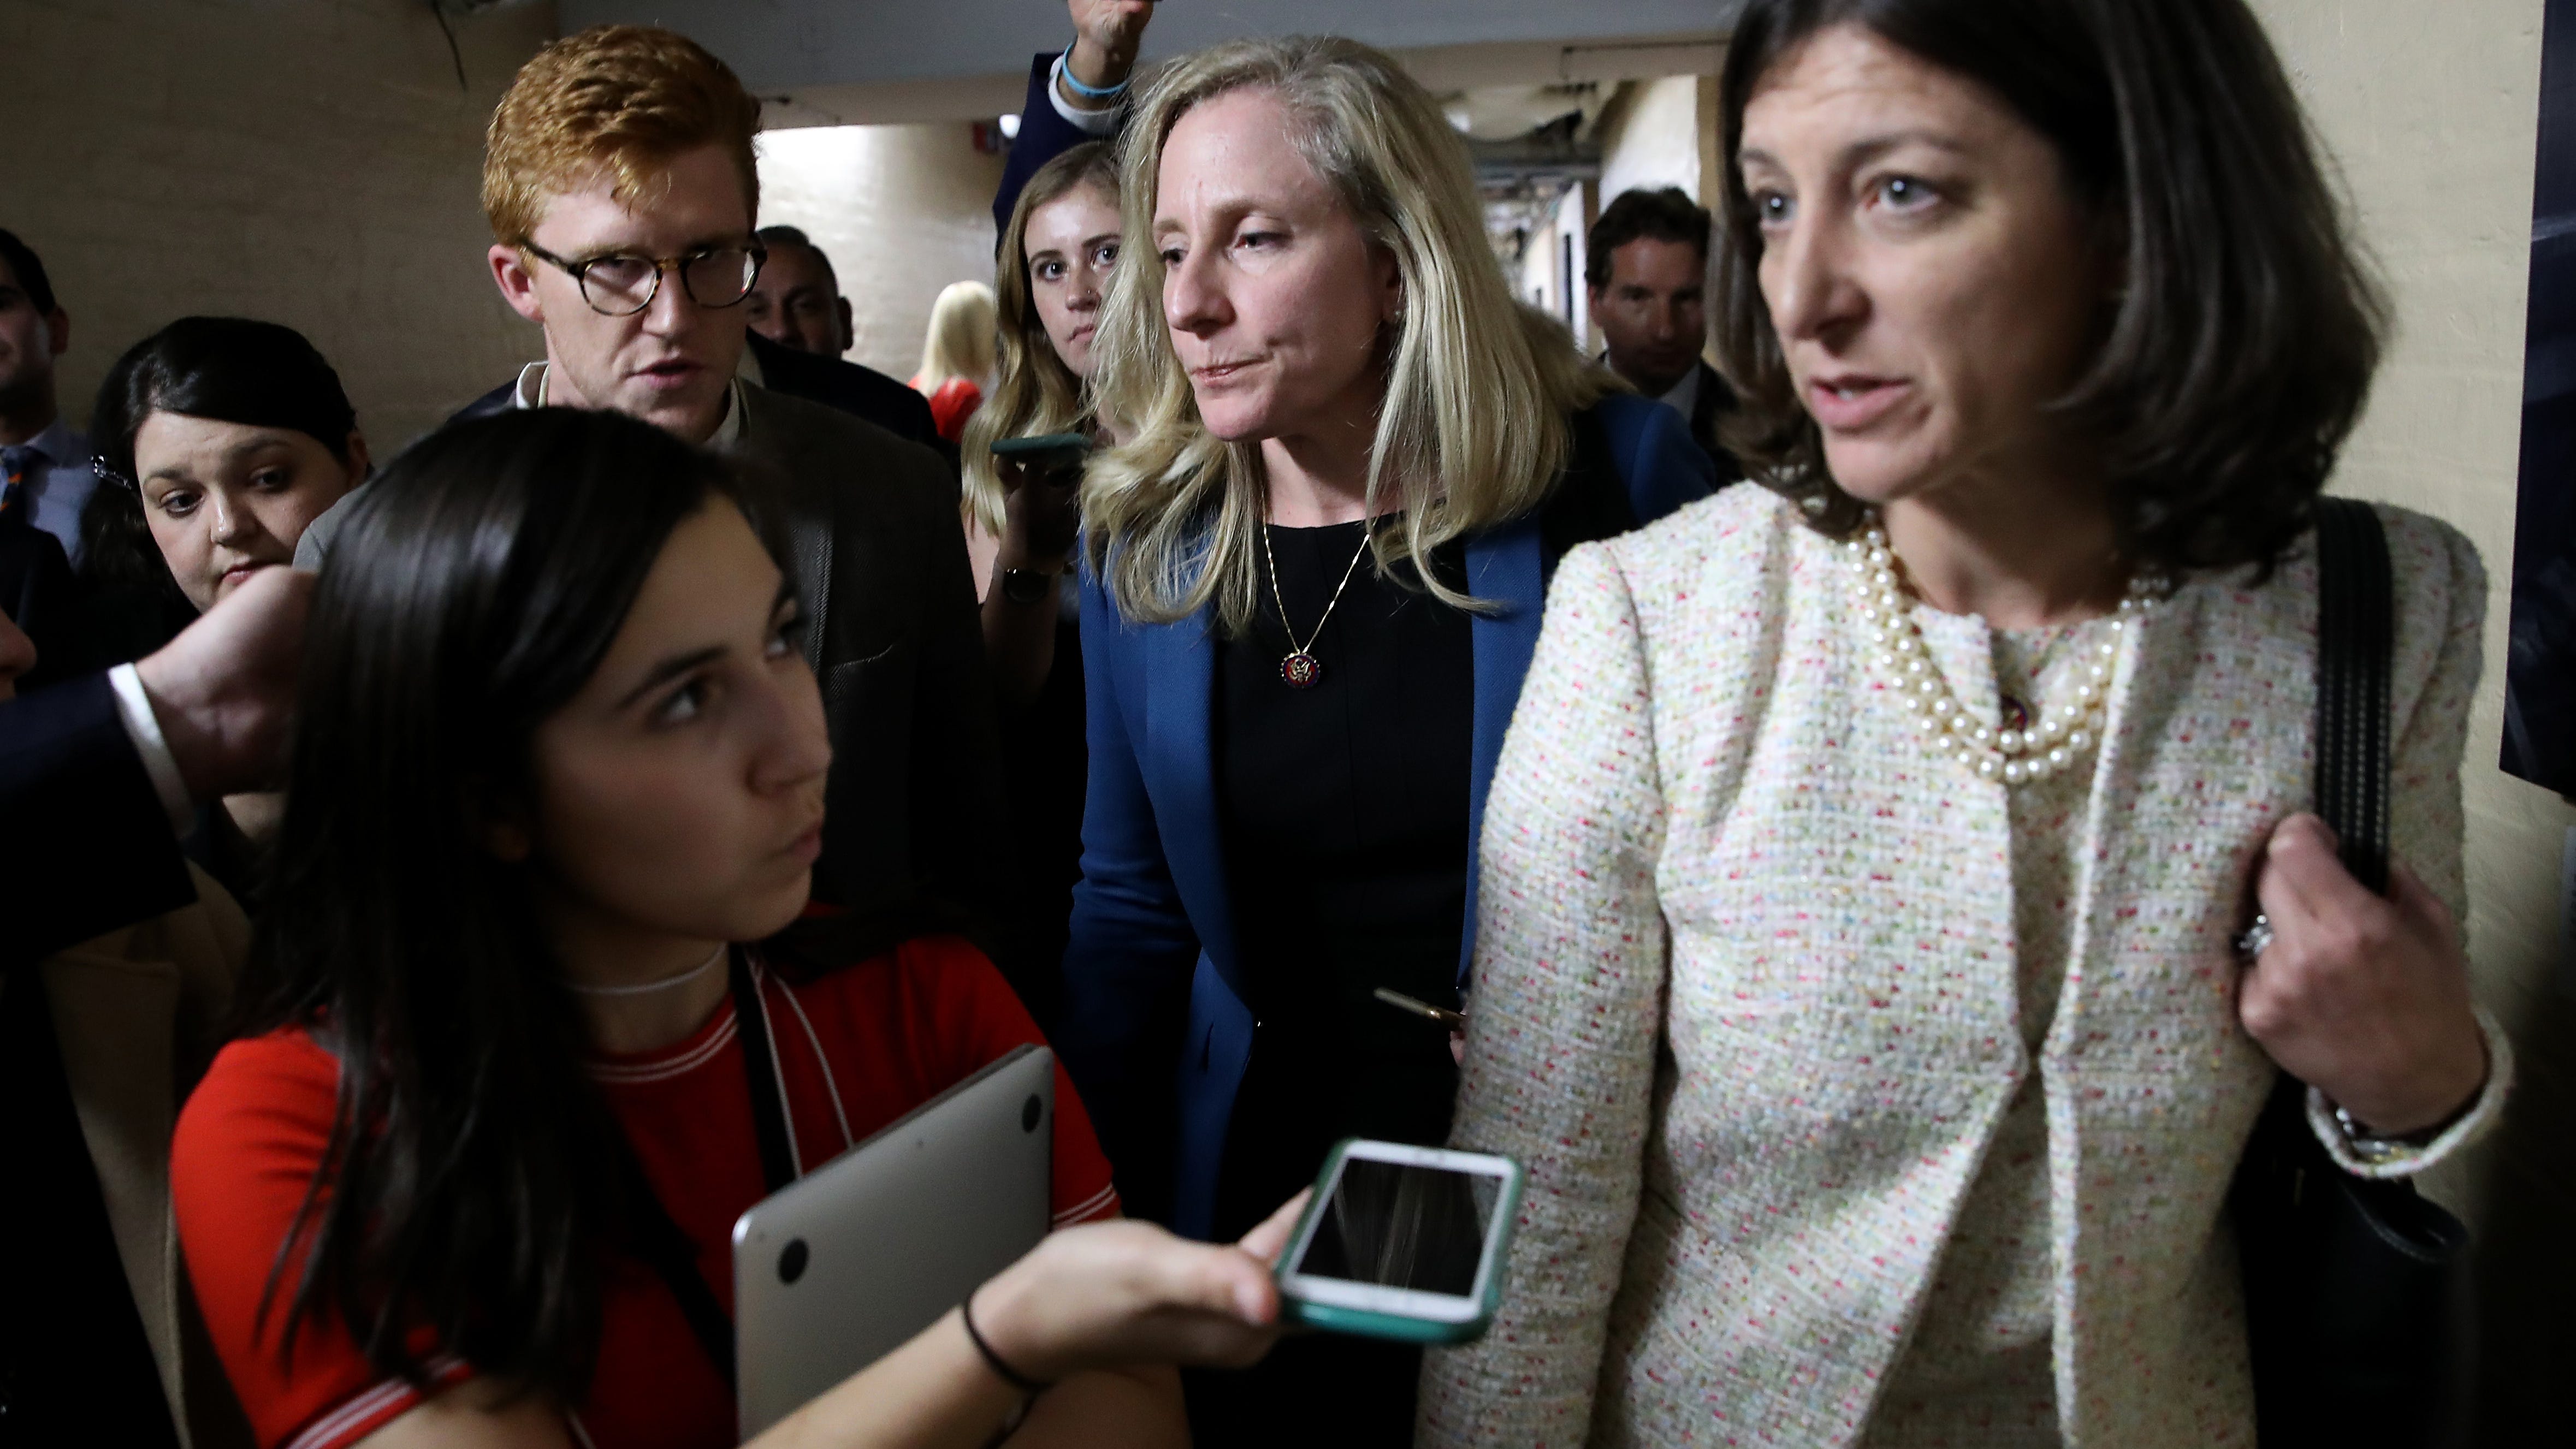 Rep. Abigail Spanberger (C) (D-VA) and Rep. Elaine Luria (R) (D-VA) are trailed by reporters after leaving a House Democratic caucus meeting at the U.S. Capitol where formal impeachment proceedings against U.S. President Donald Trump were announced by Speaker of the House Nancy Pelosi September 24, 2019 in Washington, DC.